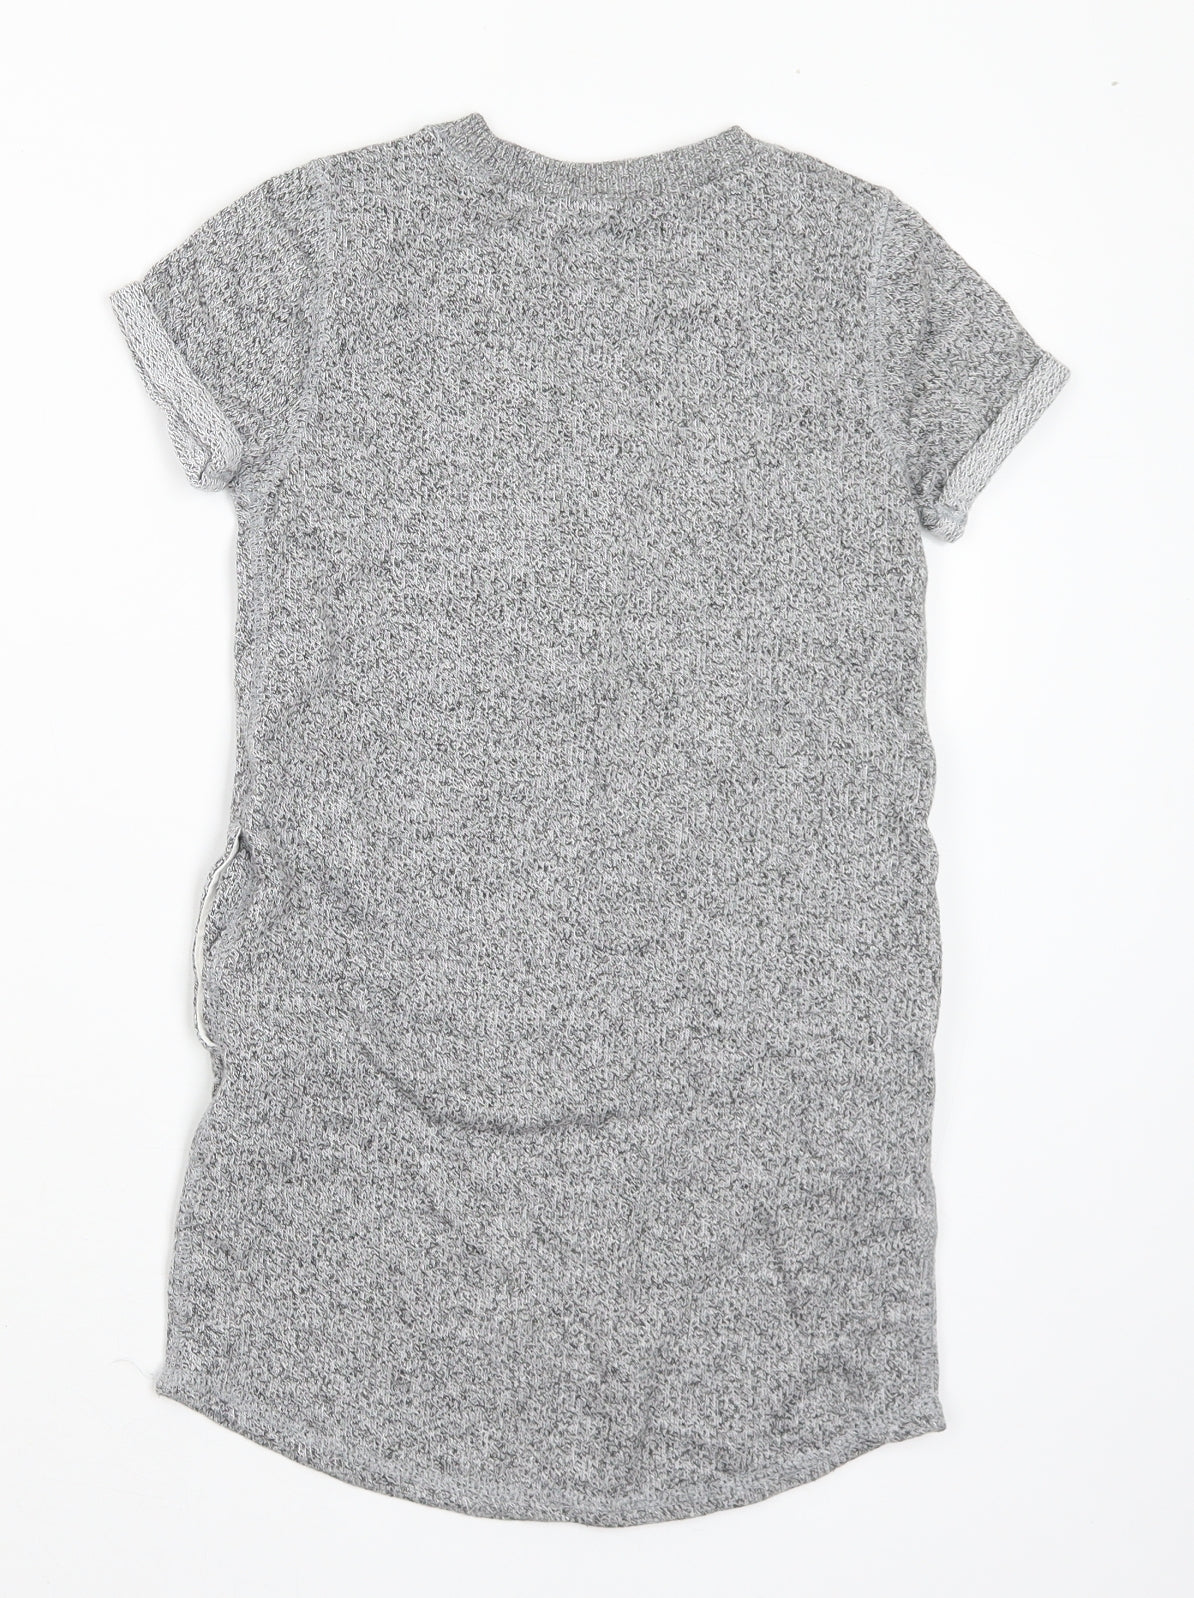 Roots Girls Grey Cotton Jumper Dress Size 5-6 Years Crew Neck